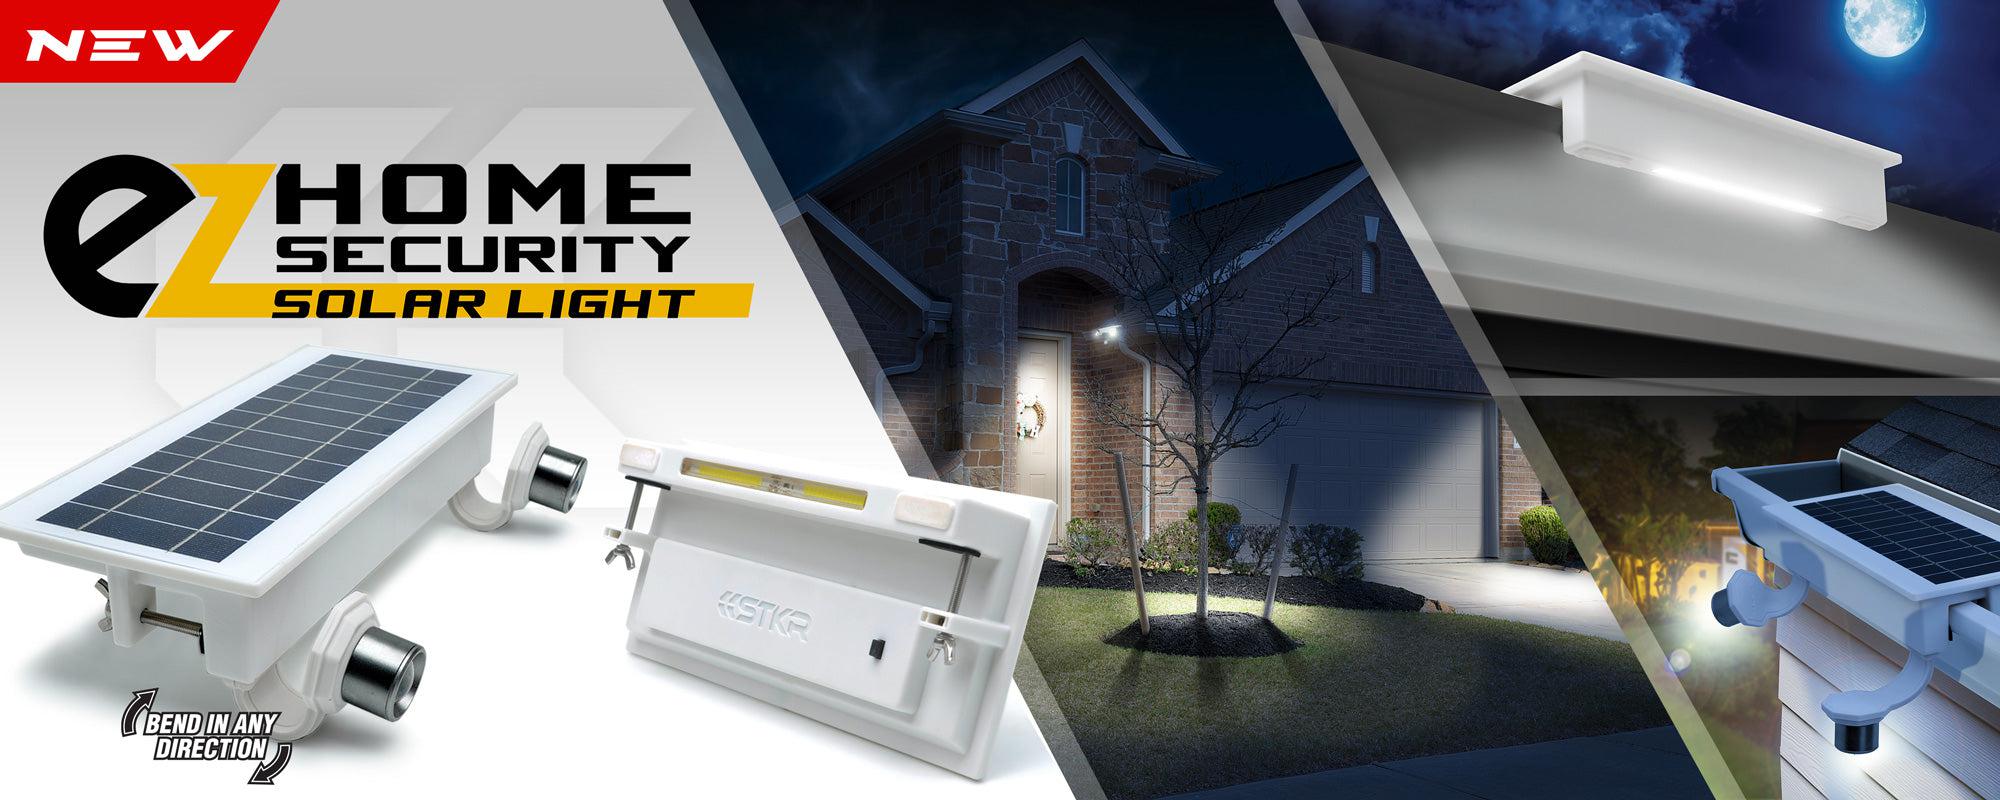 EZ Home Security Solar Gutter Lights Banner featuring the Floodlight and the FLEXIT Spotlight.